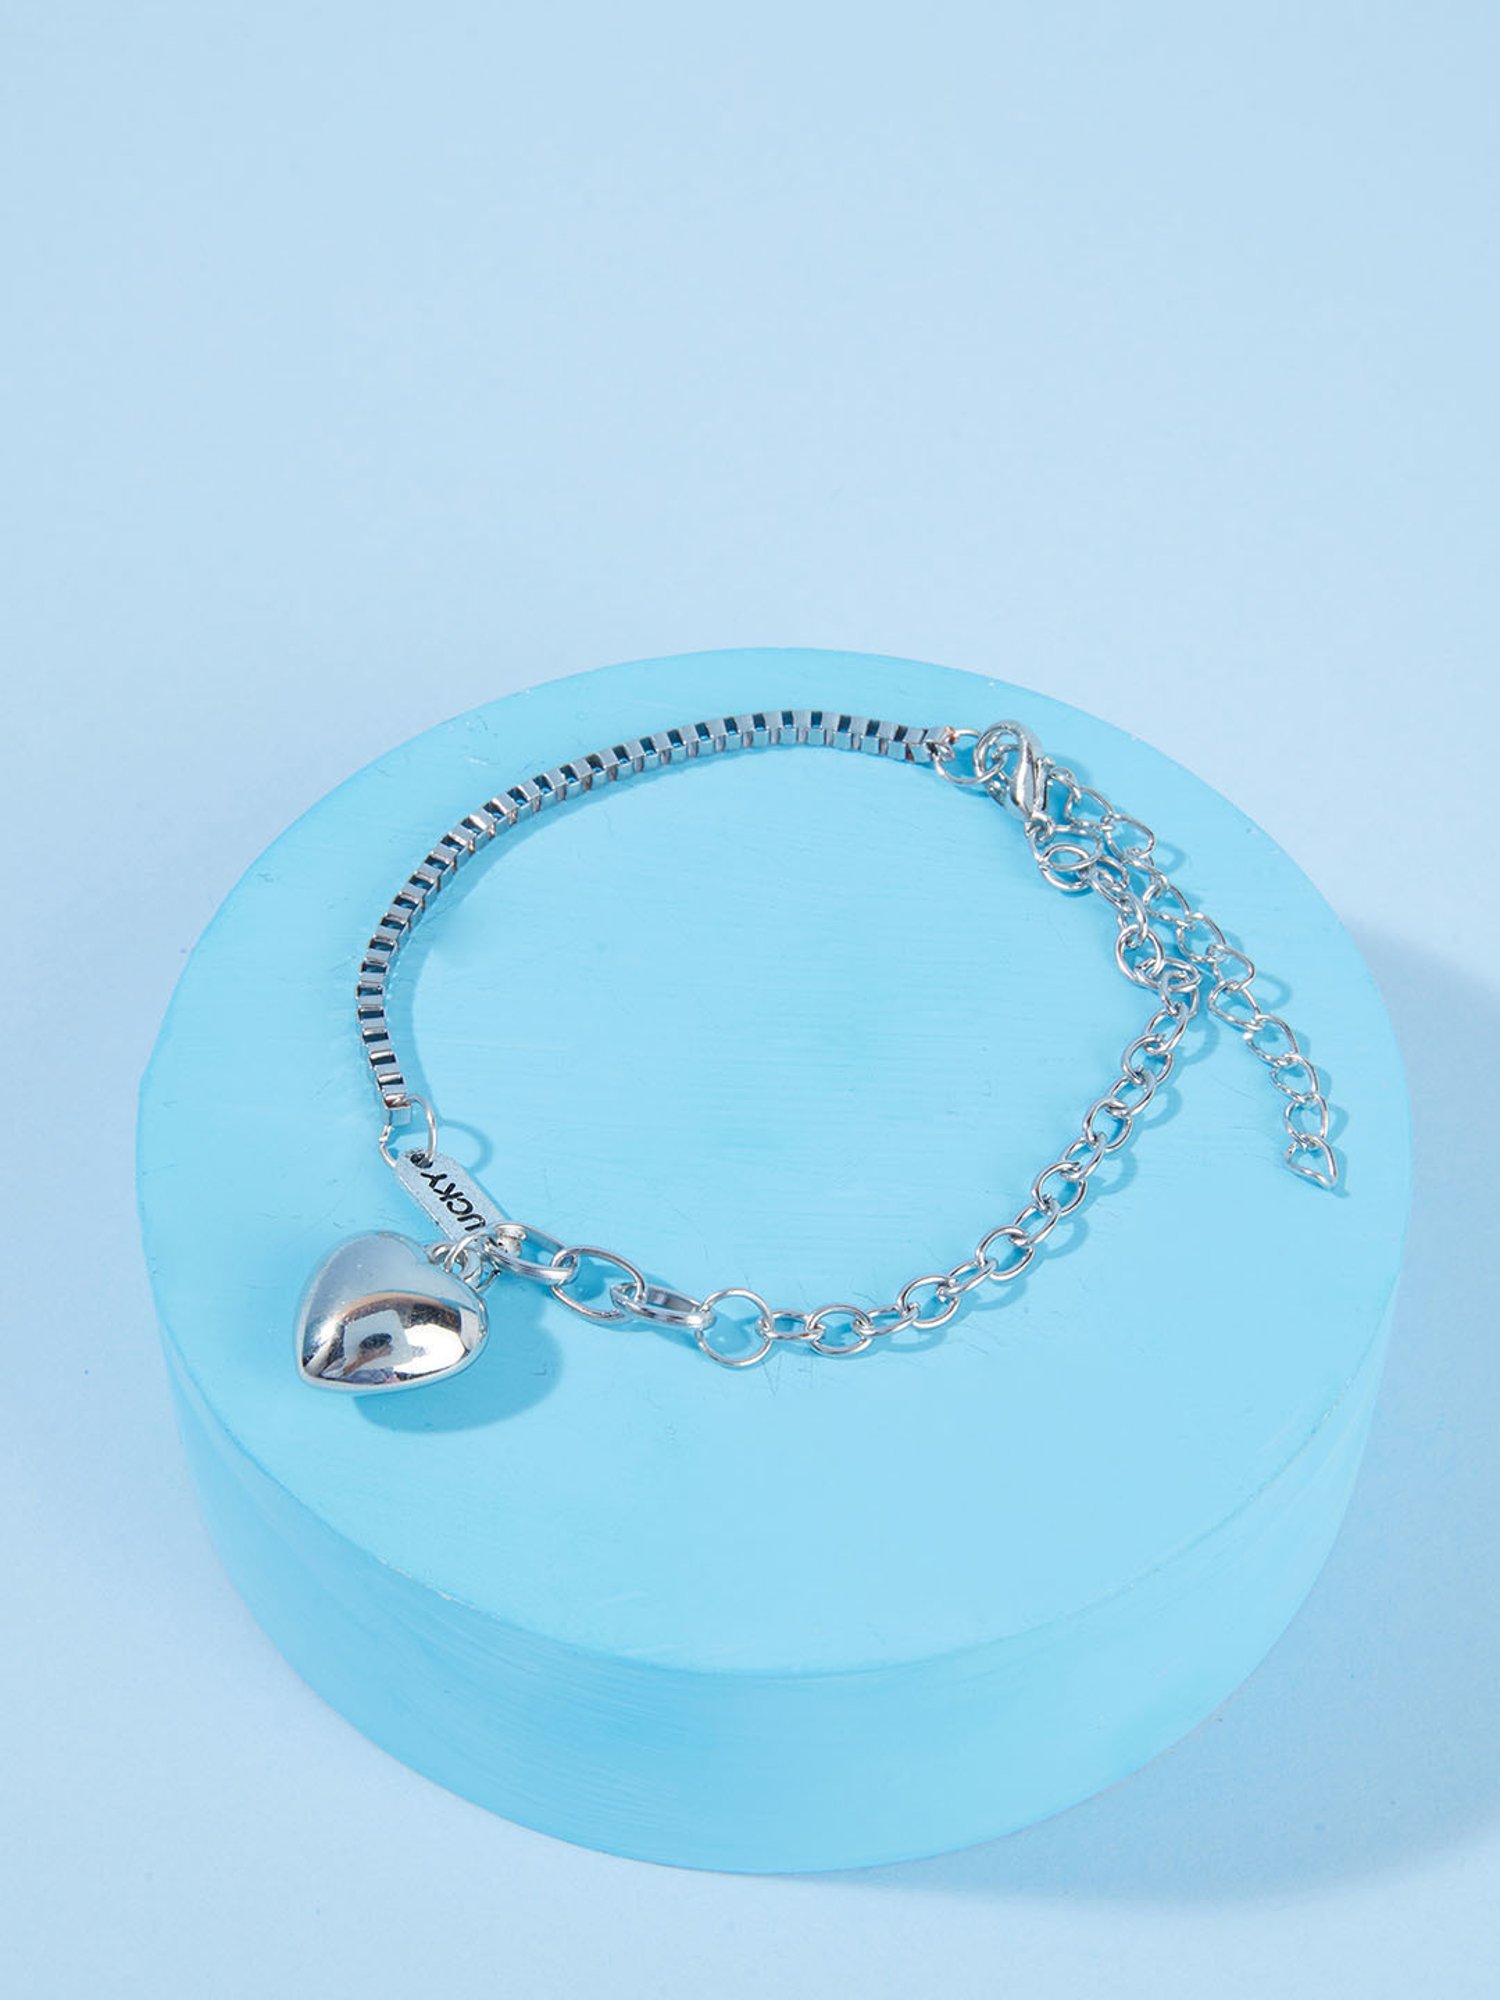 Buy Minimal Heart Charm Silver Plated Bracelet Online At Best Price @ Tata  CLiQ